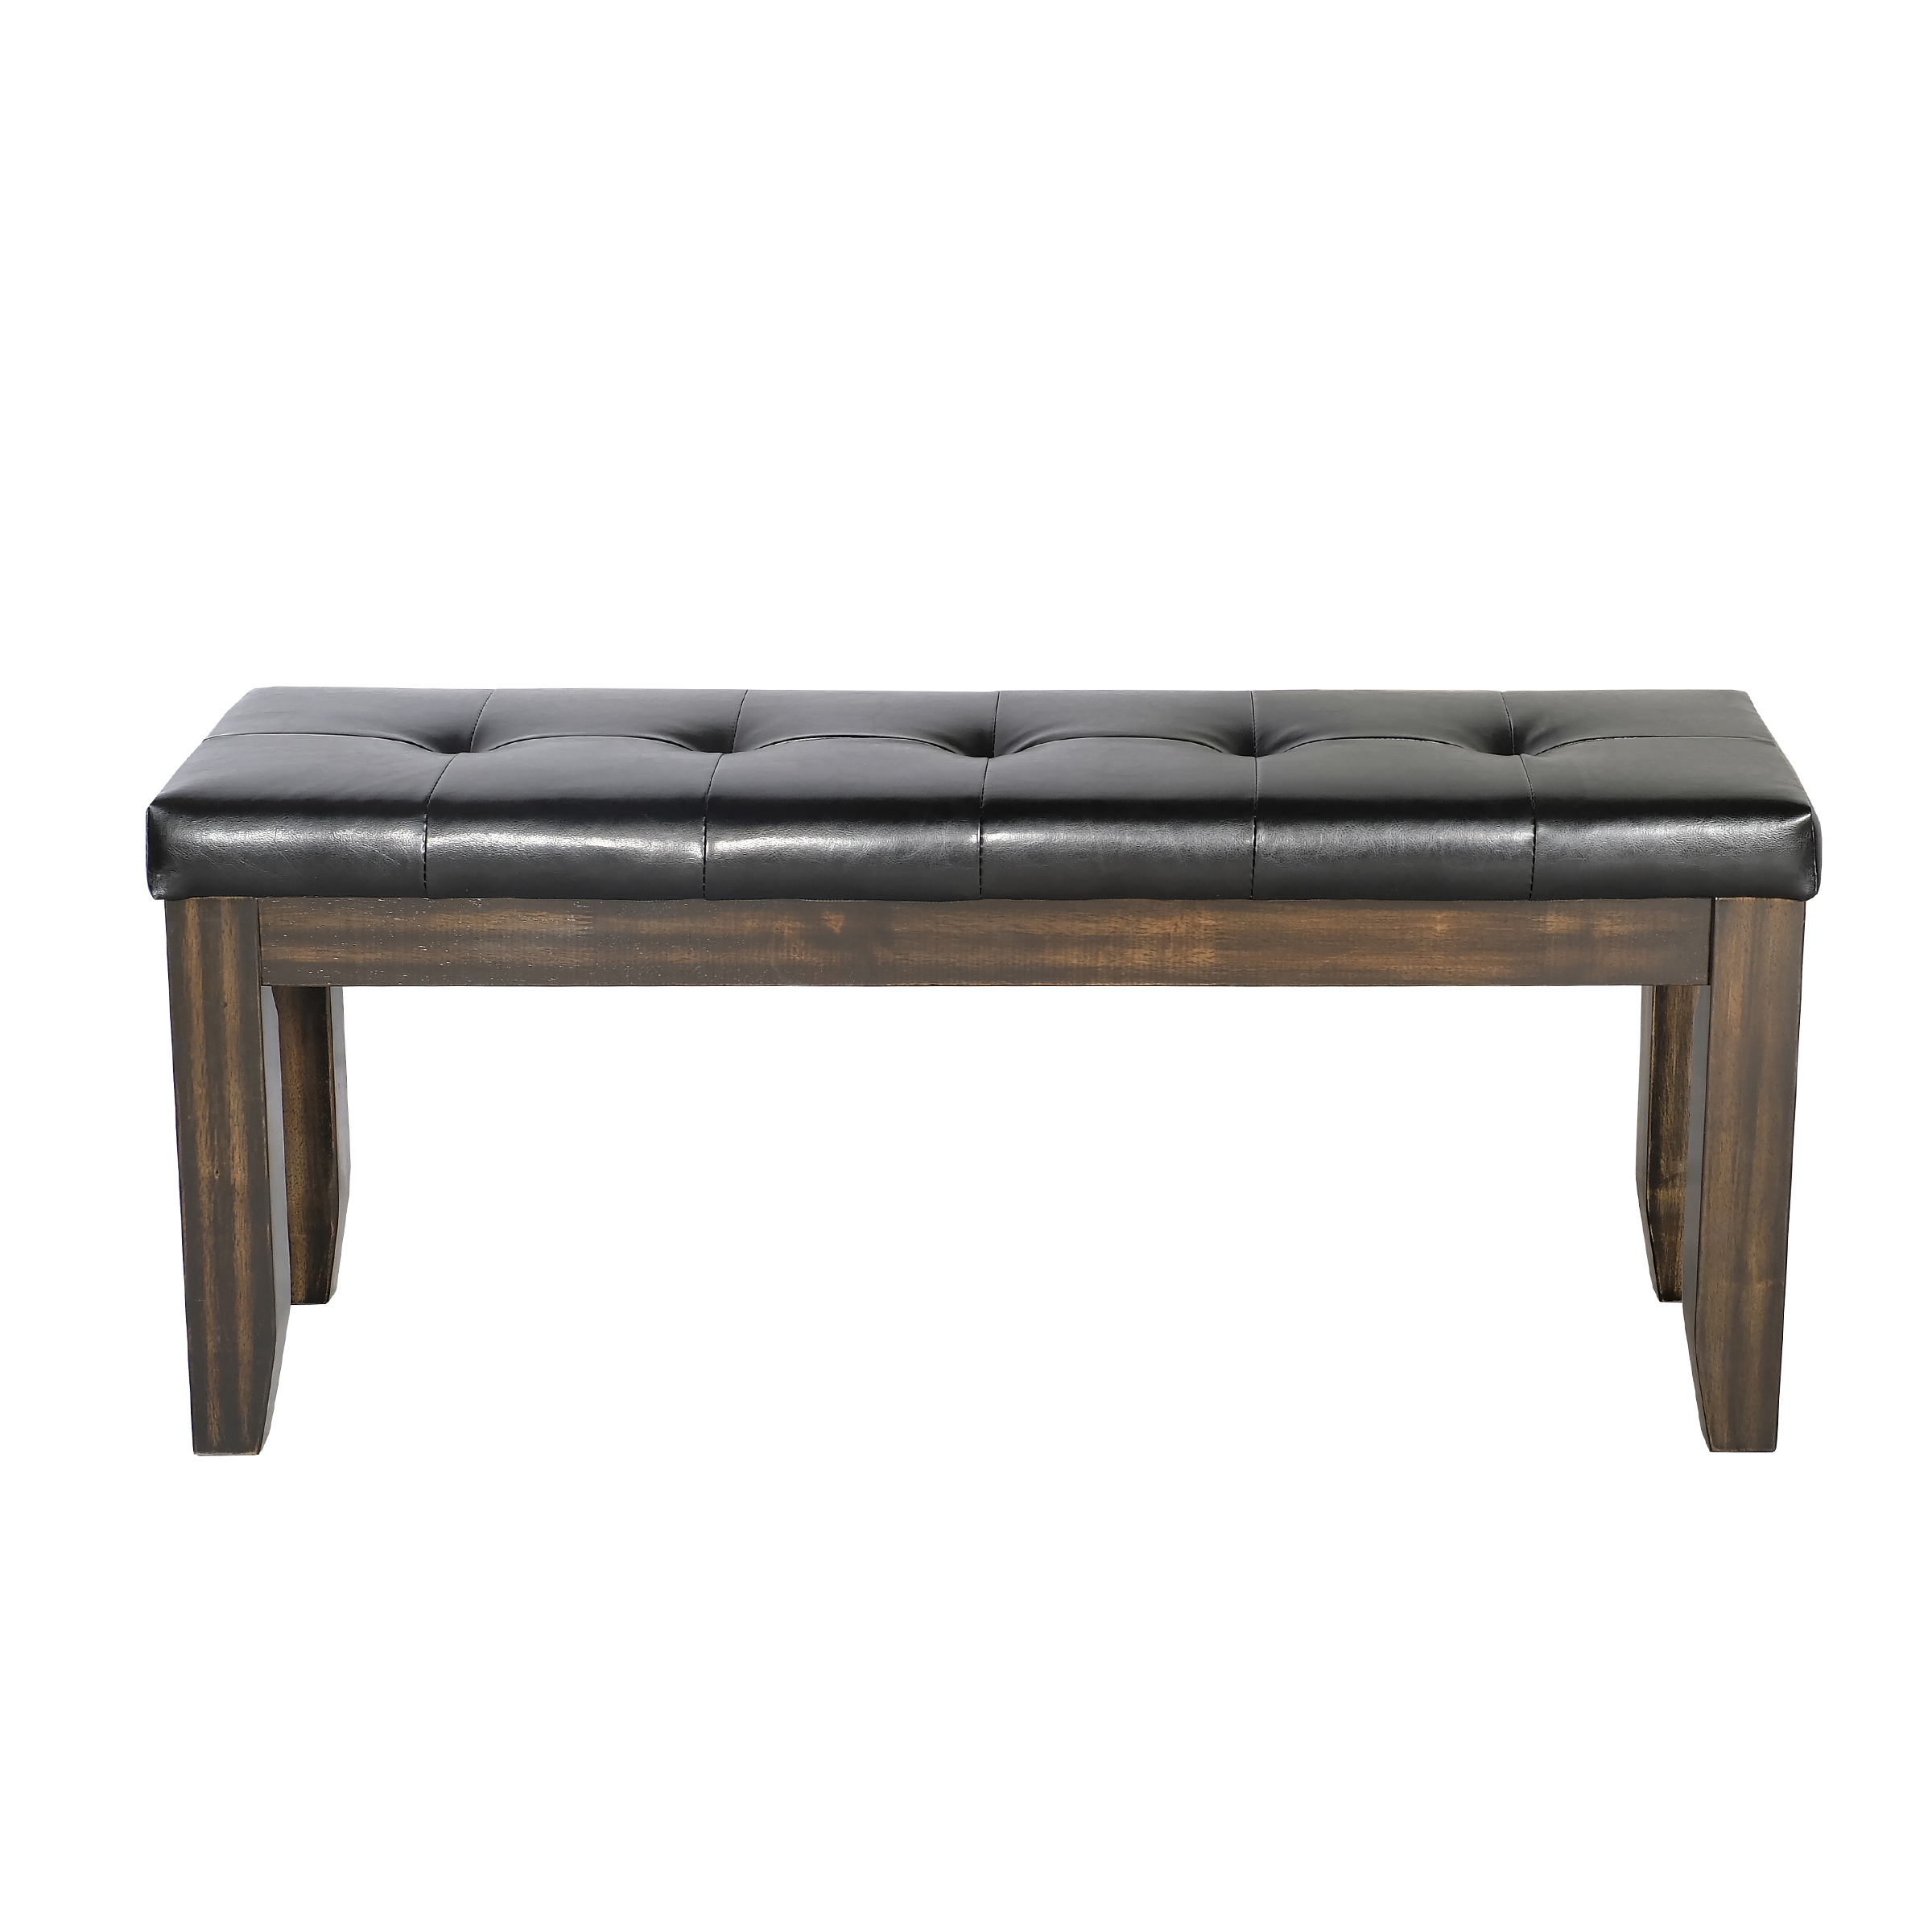 Primo International Charlie Dining Bench - image 2 of 6